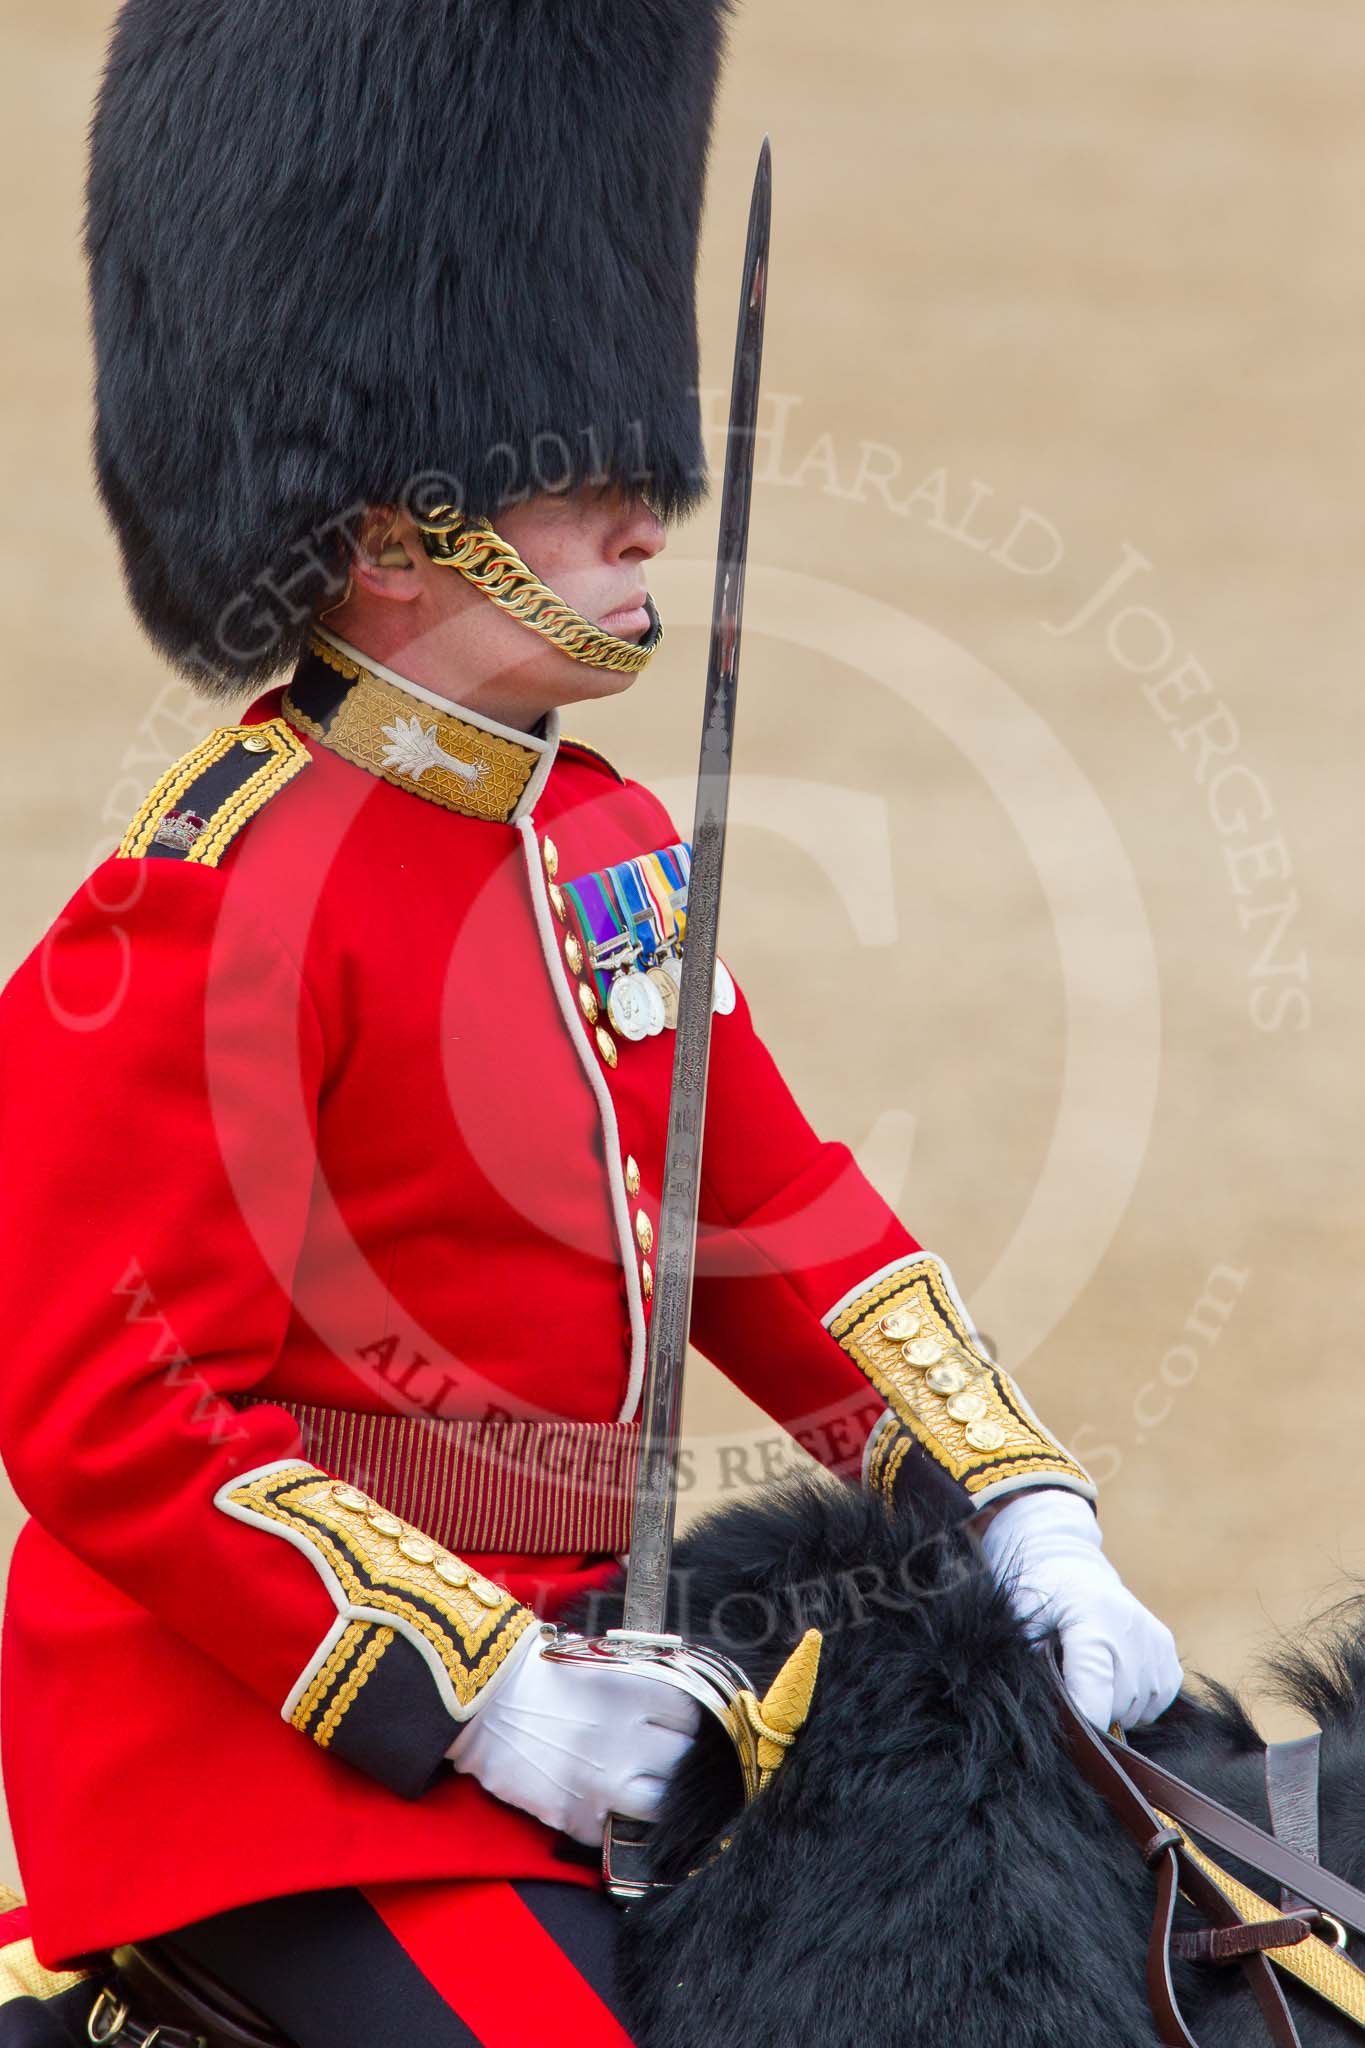 Trooping the Colour 2011: Close-up of the Major of the Parade, Major Benedict Peter Norman Ramsay, Welsh Guards. He was awarded a CBE on the day of the parade..
Horse Guards Parade, Westminster,
London SW1,
Greater London,
United Kingdom,
on 11 June 2011 at 11:35, image #230